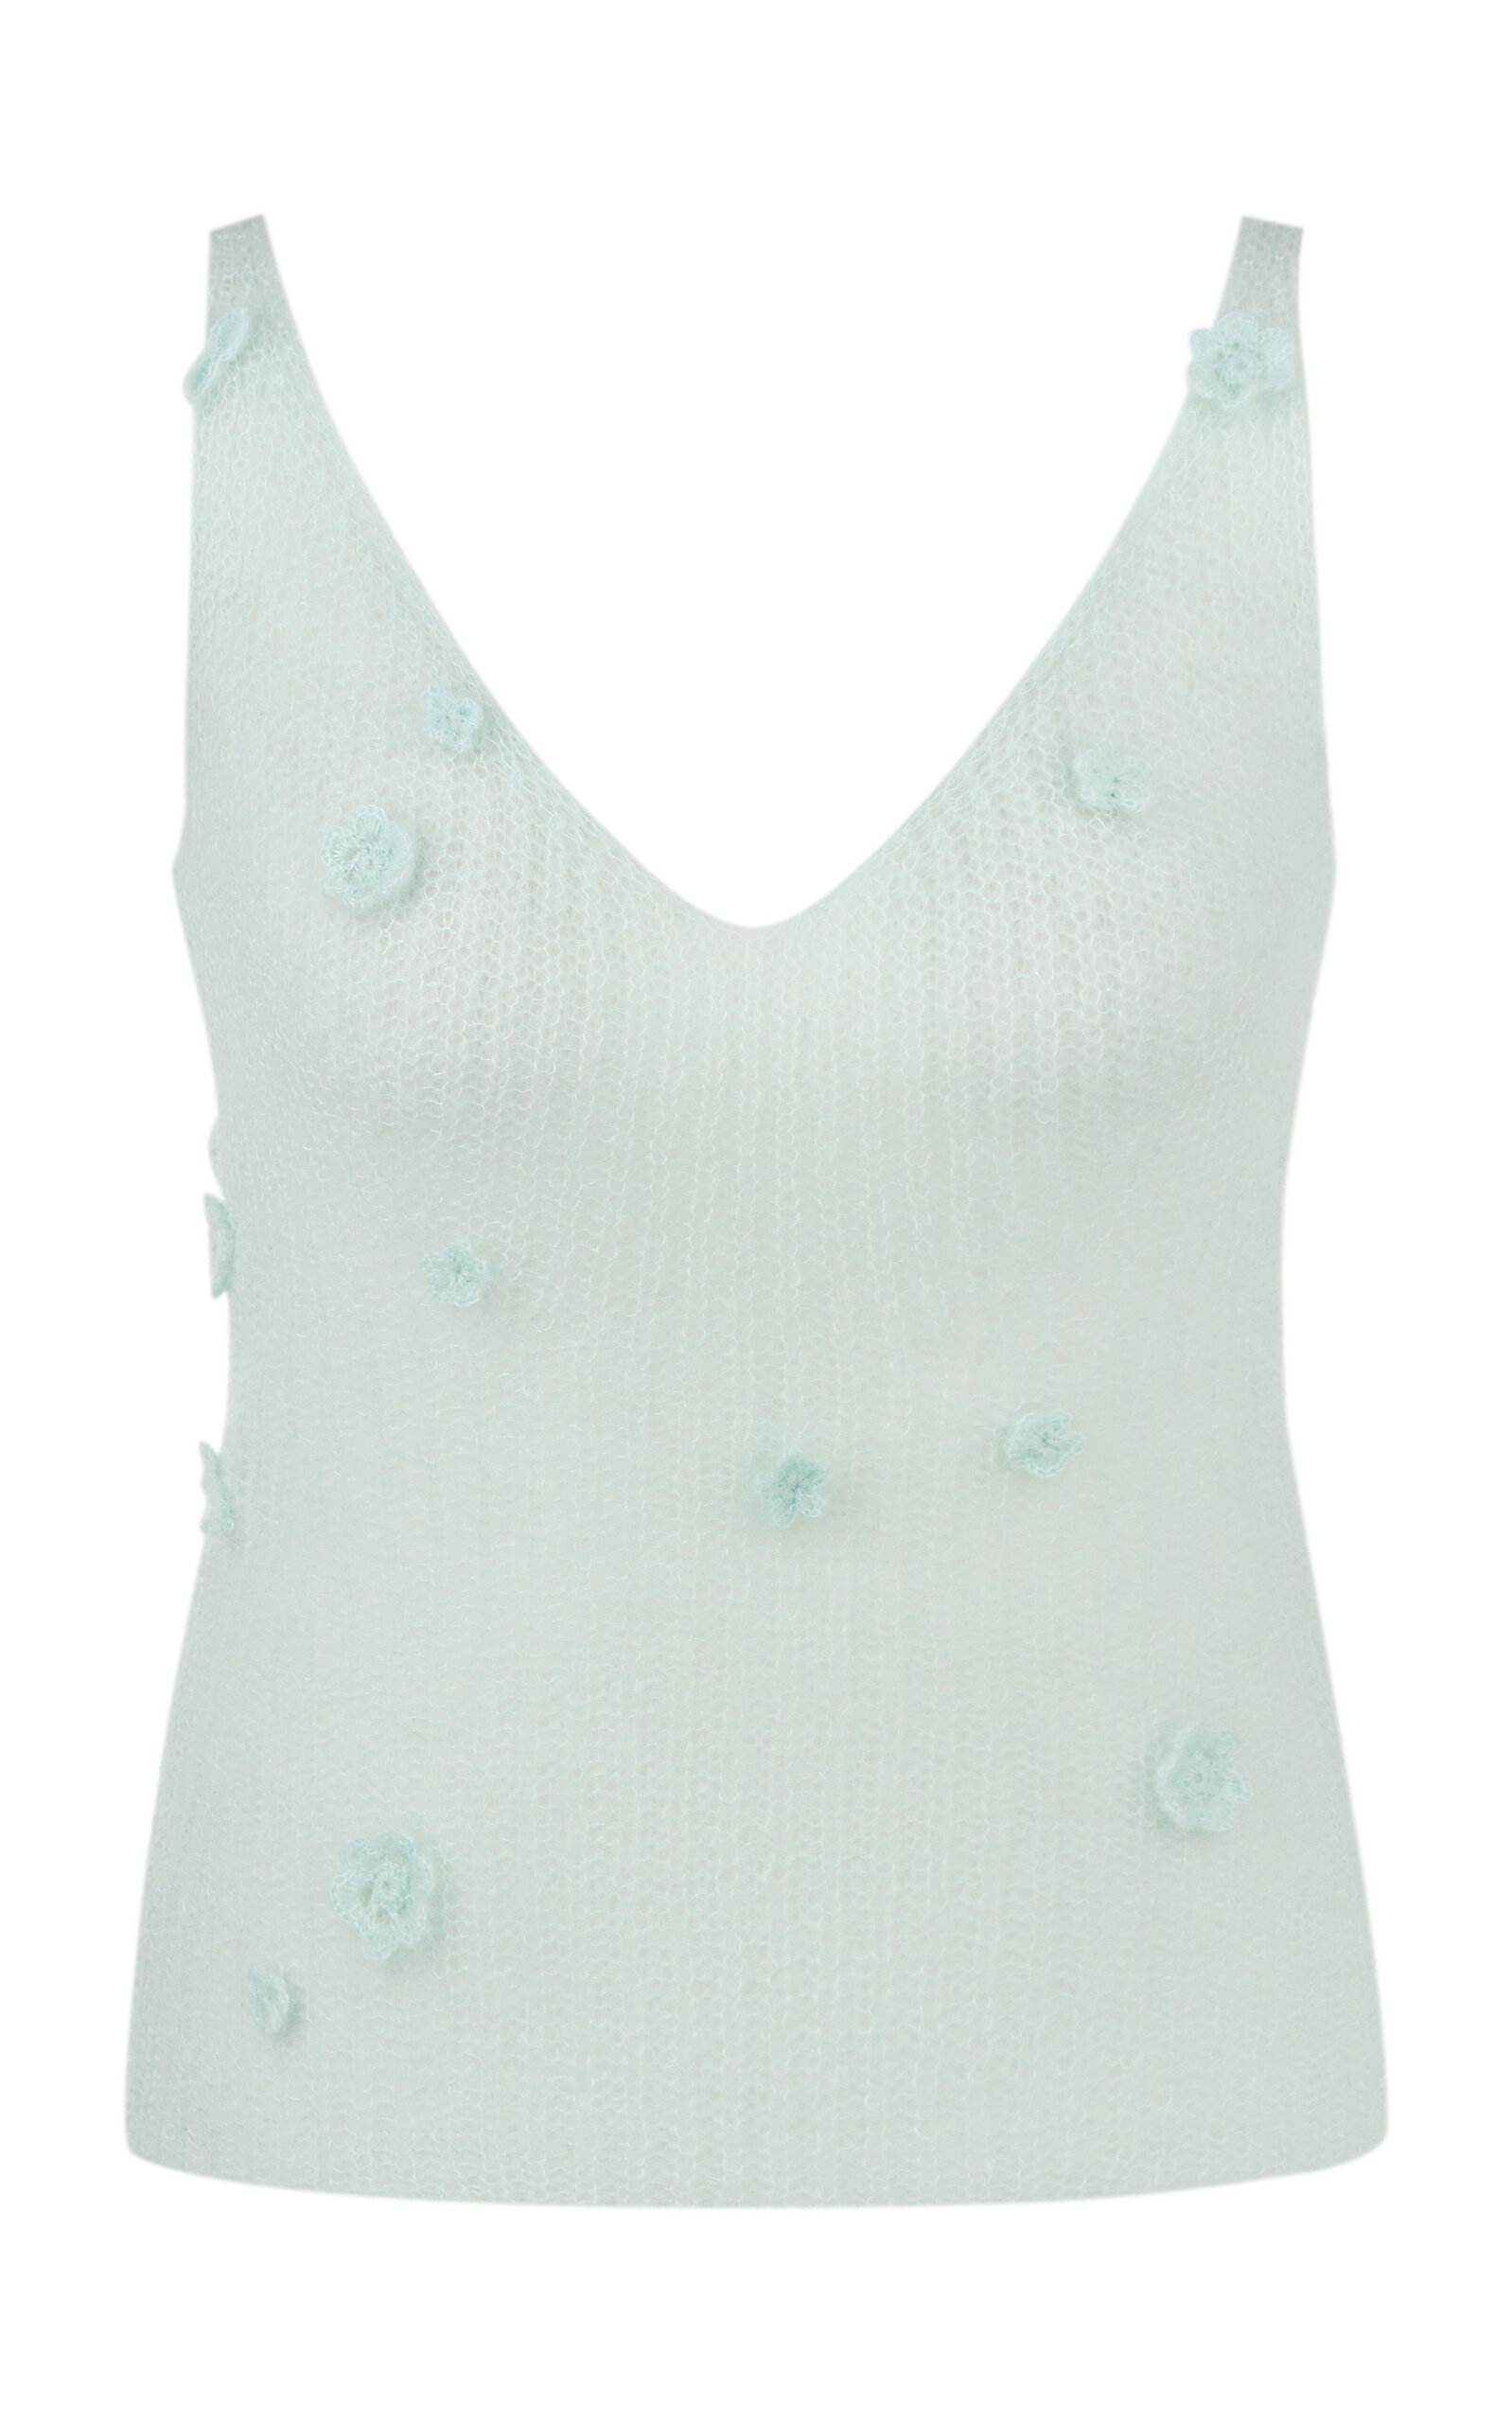 Imany Flower-Embellished Mohair Knit Top